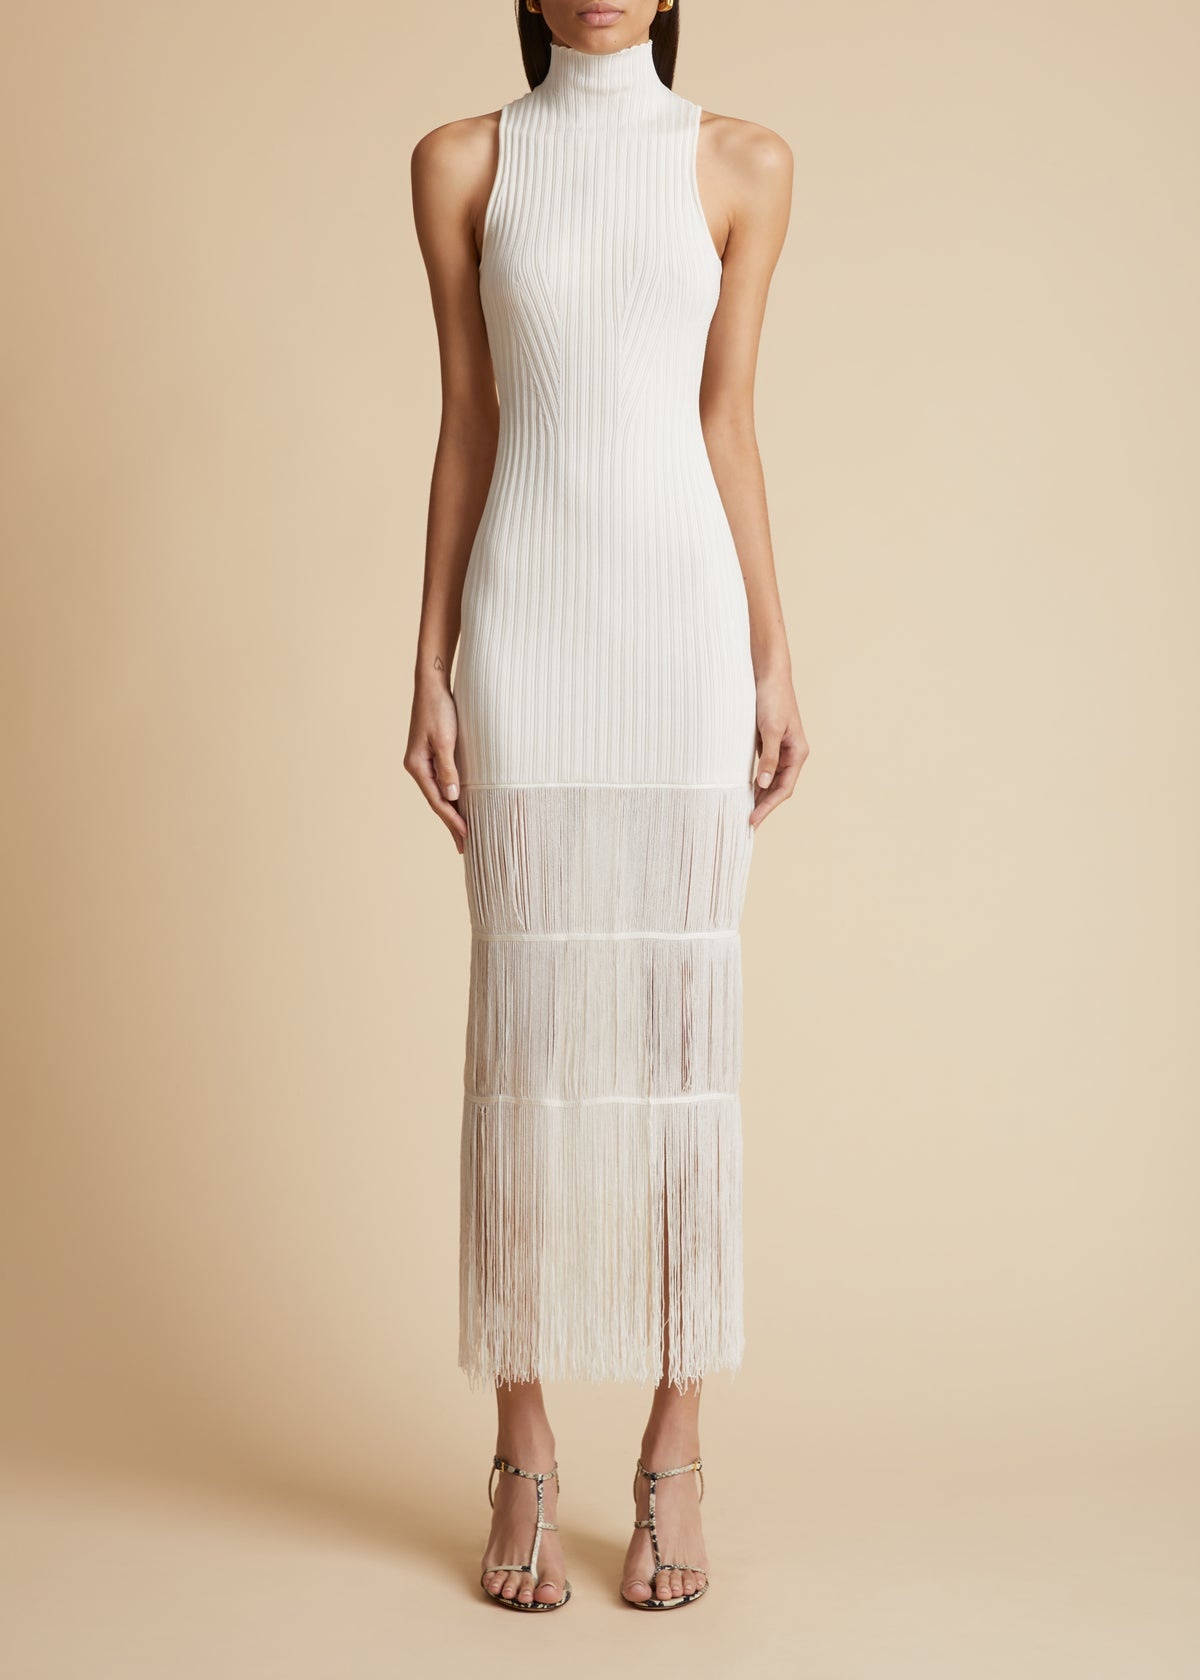 The Zare Dress in Ivory - 2